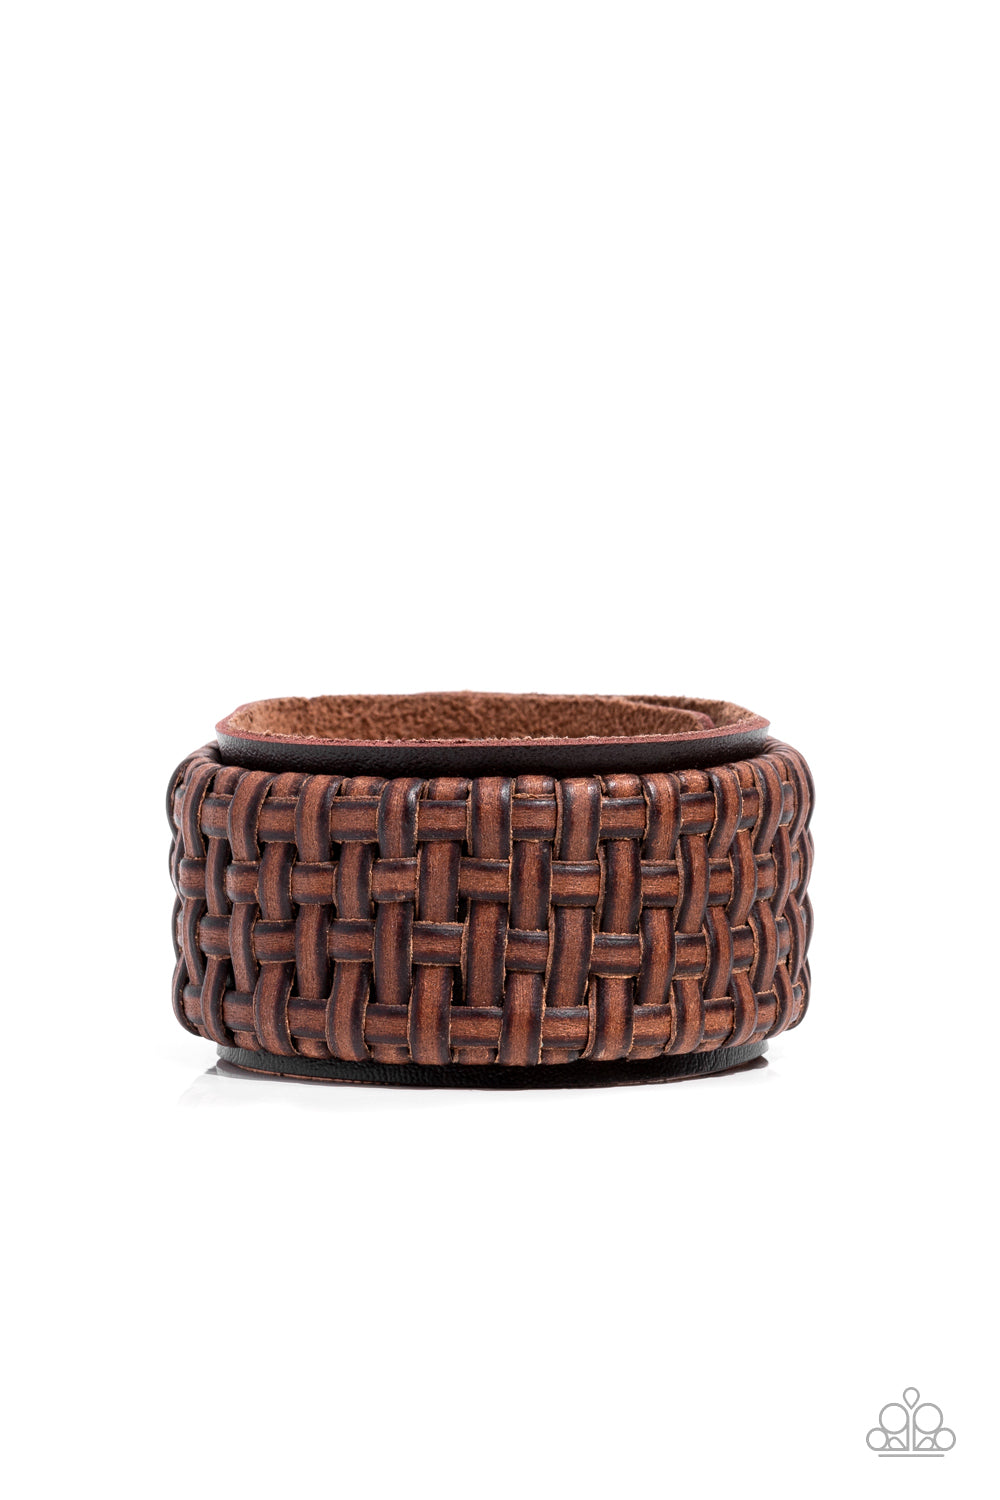 Paparazzi Accessories Urban Expansion - Brown Urban Leather Convention Bracelets distressed leather laces weave into a wicker-like pattern, creating a thick band of texture that wraps around a leather band. The textured overlay is studded in place across the front of the brown leather band, resulting in a rustic centerpiece. Features an adjustable snap closure.  Sold as one individual bracelet.  2022 Glow Convention 